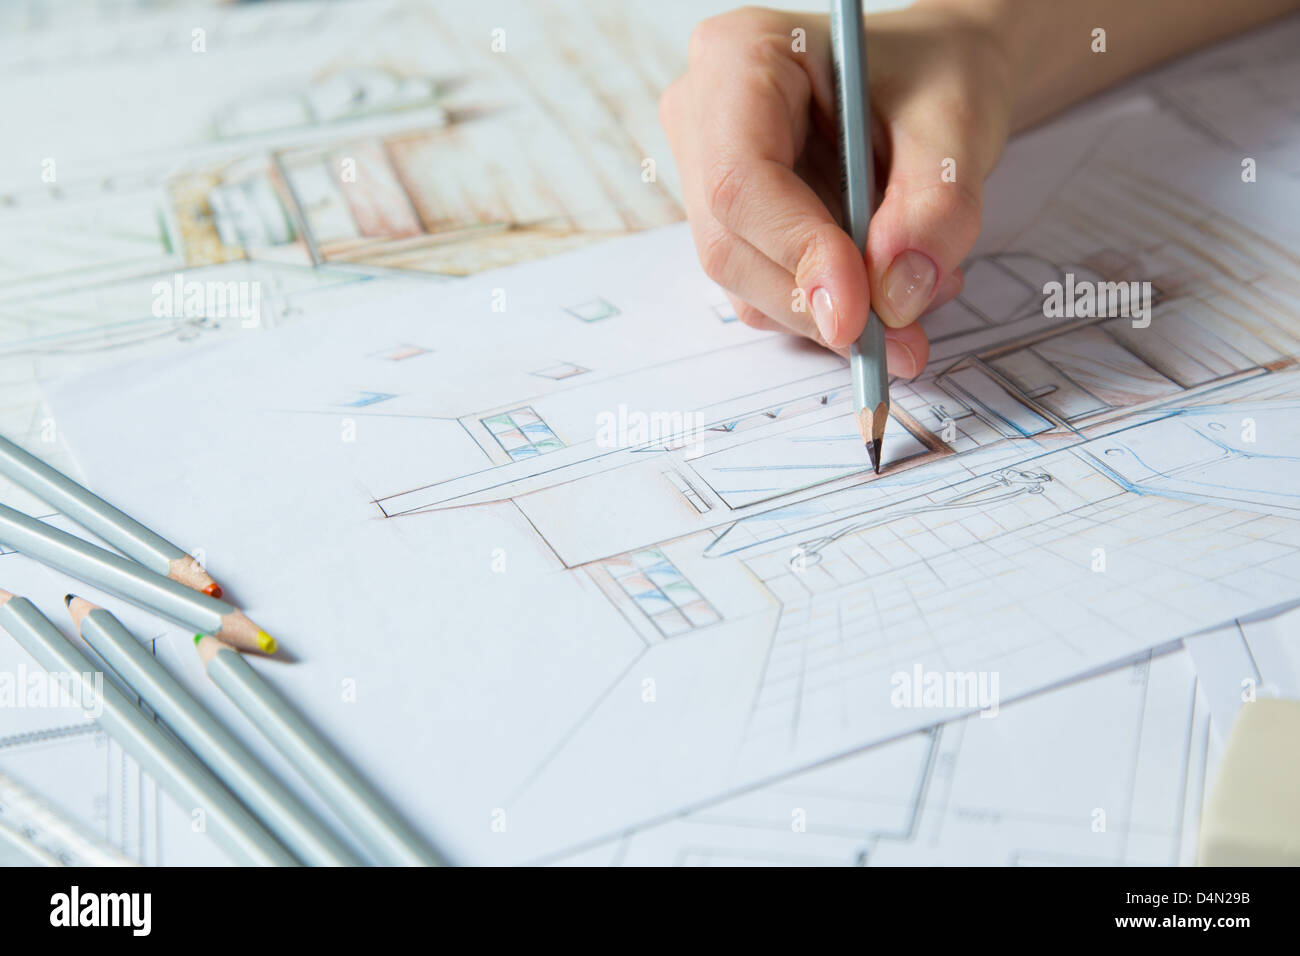 Interior designer works on a hand drawing sketch using color pencils, rule and rubber Stock Photo